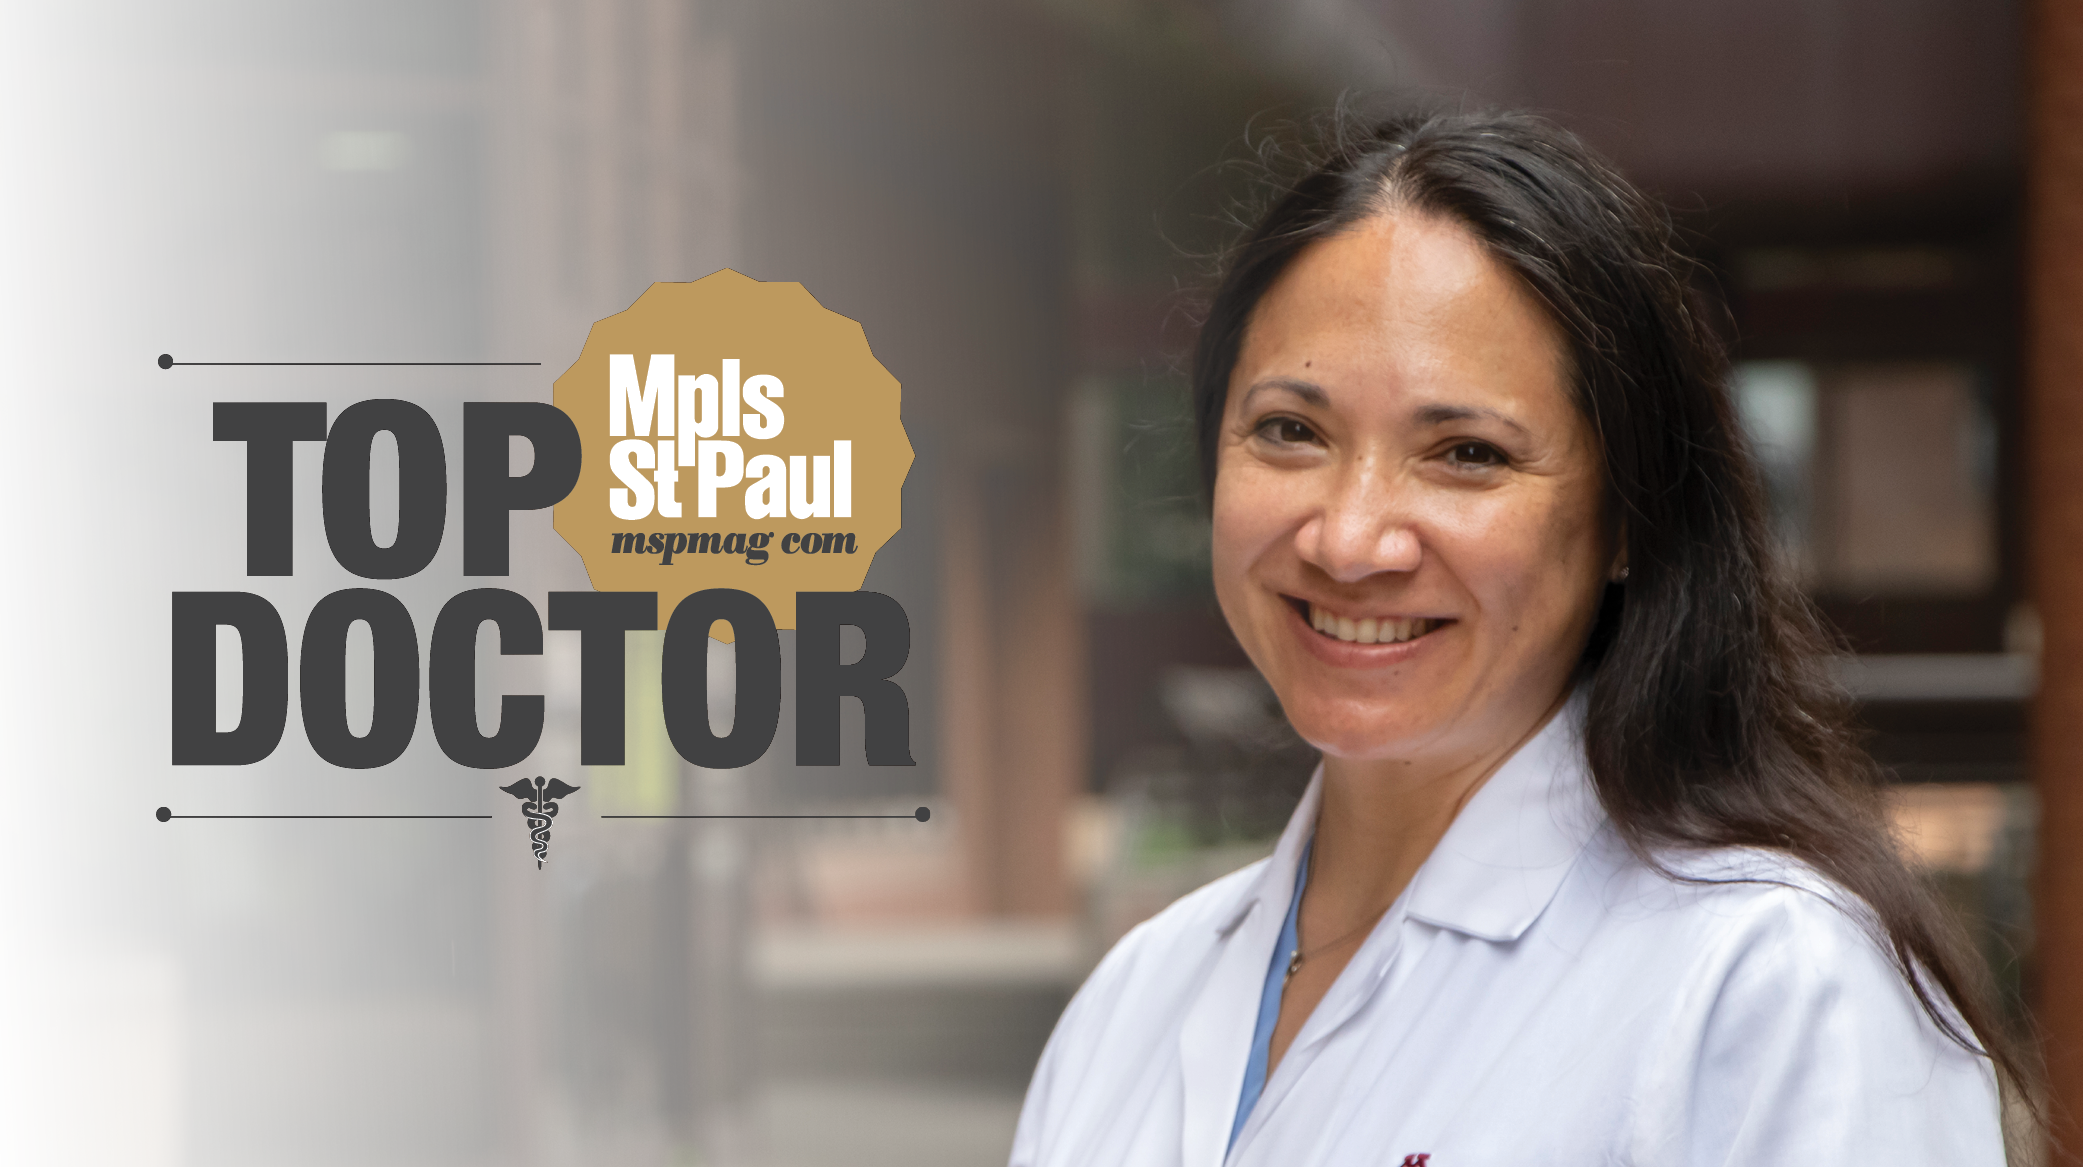 A doctor with the Top Doctors logo